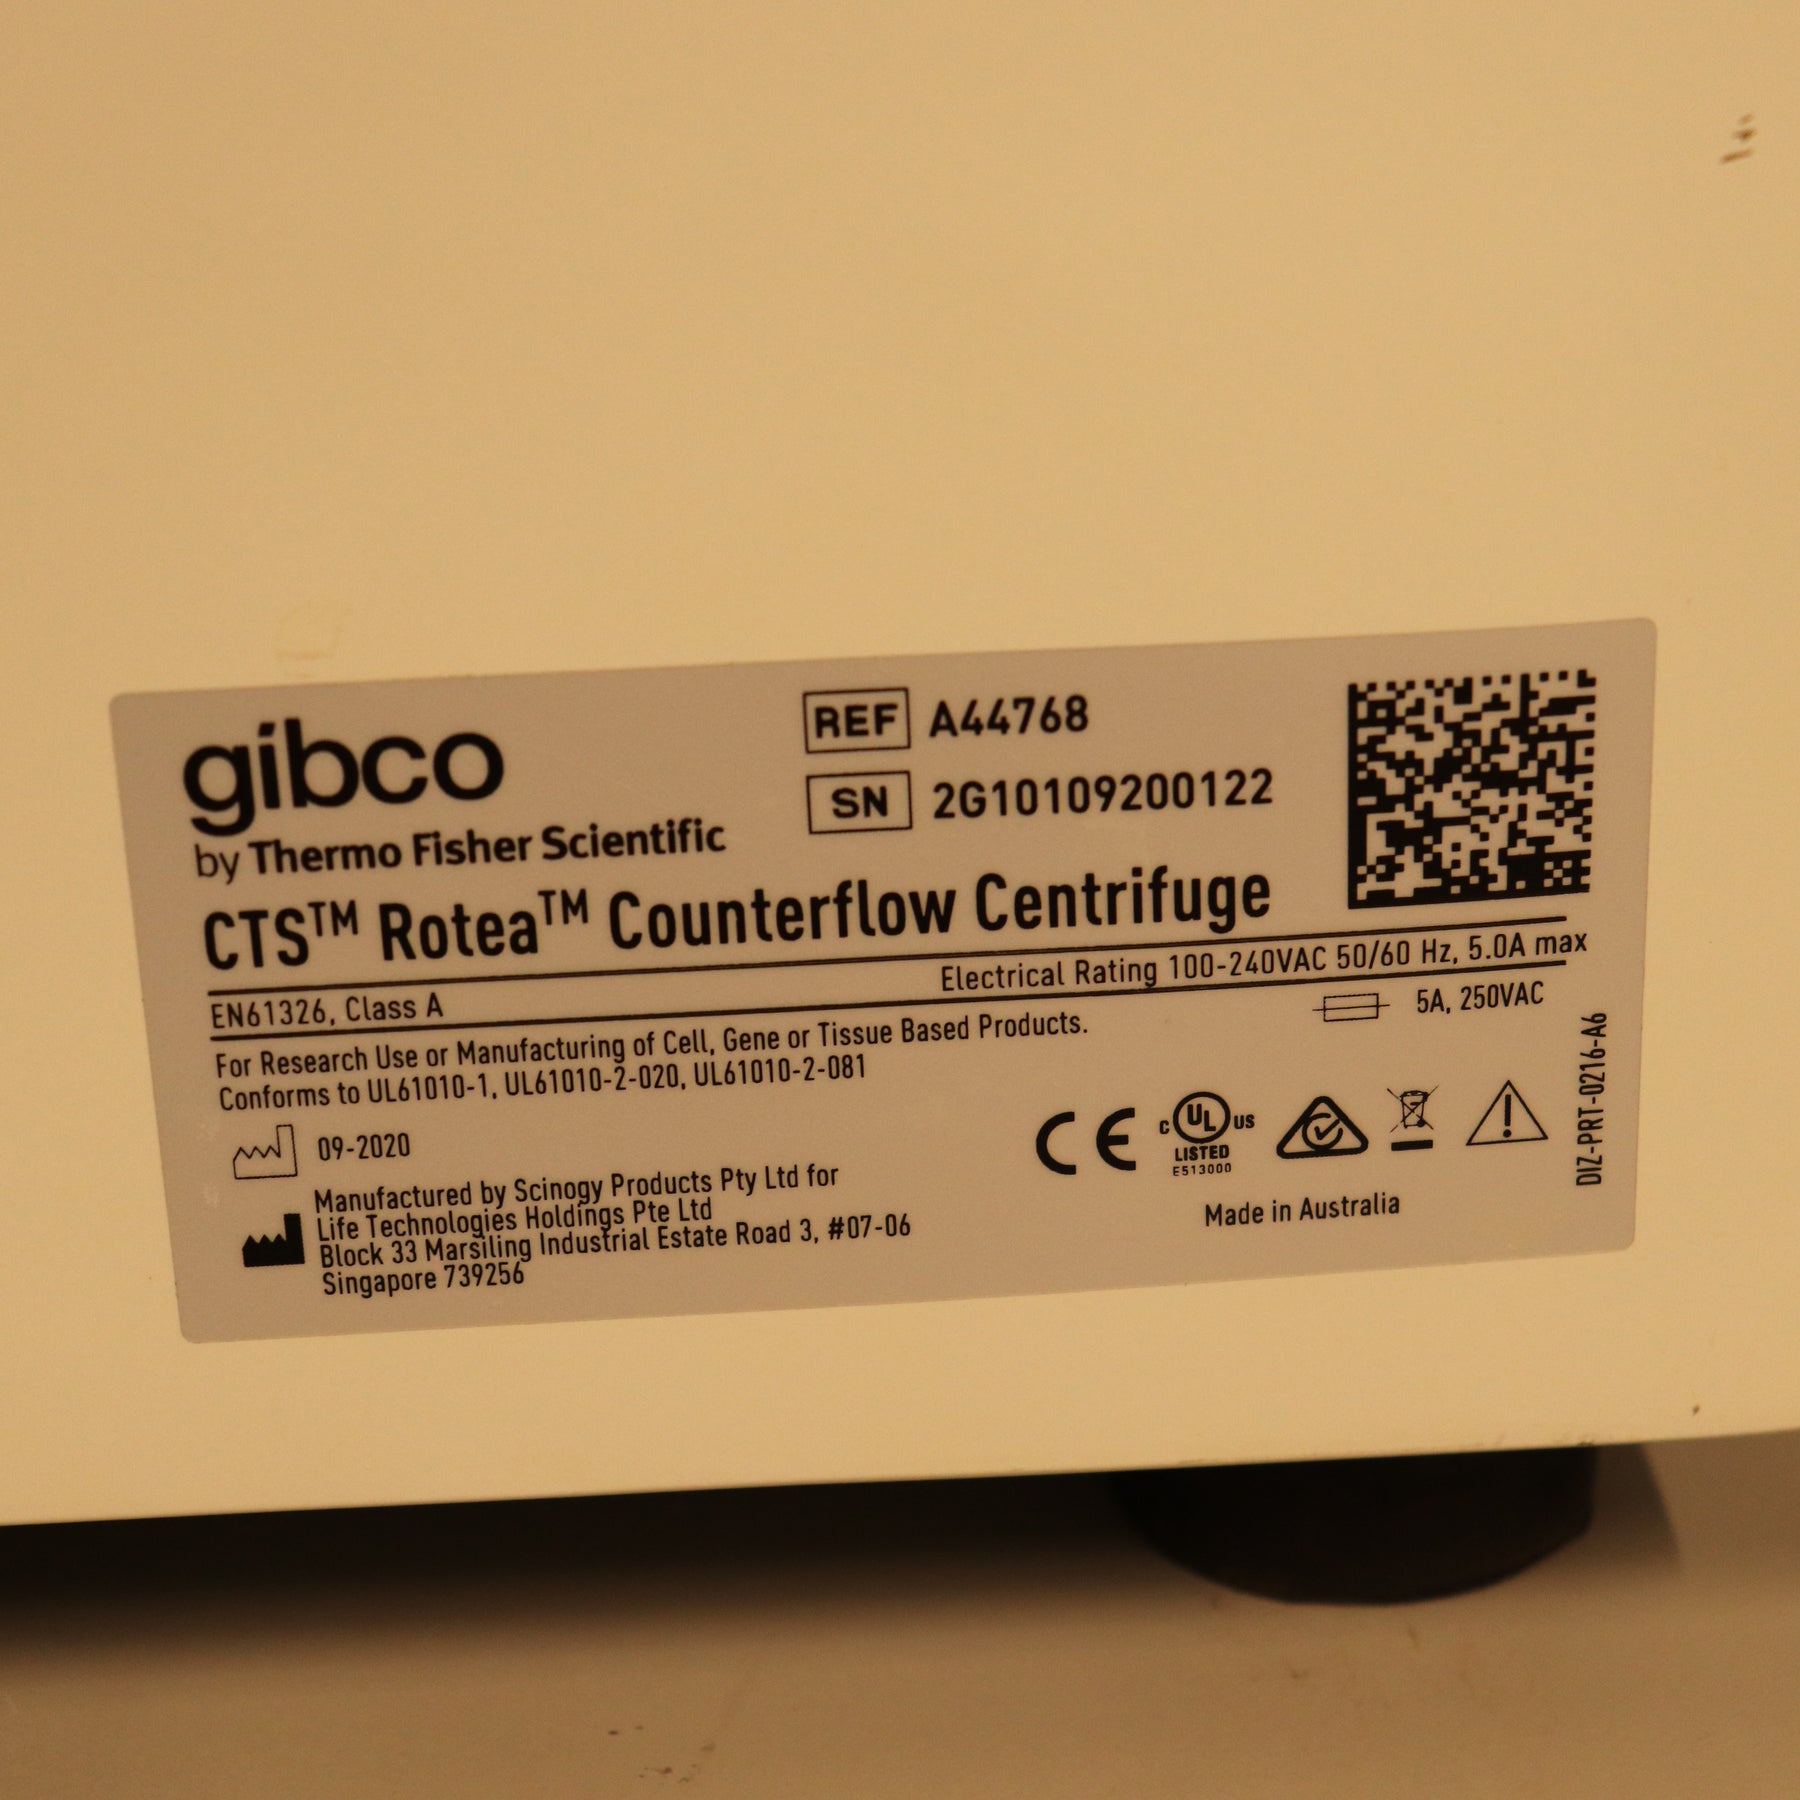 Thermo Gibco CTS Rotea Counterflow Centrifugation System A44768